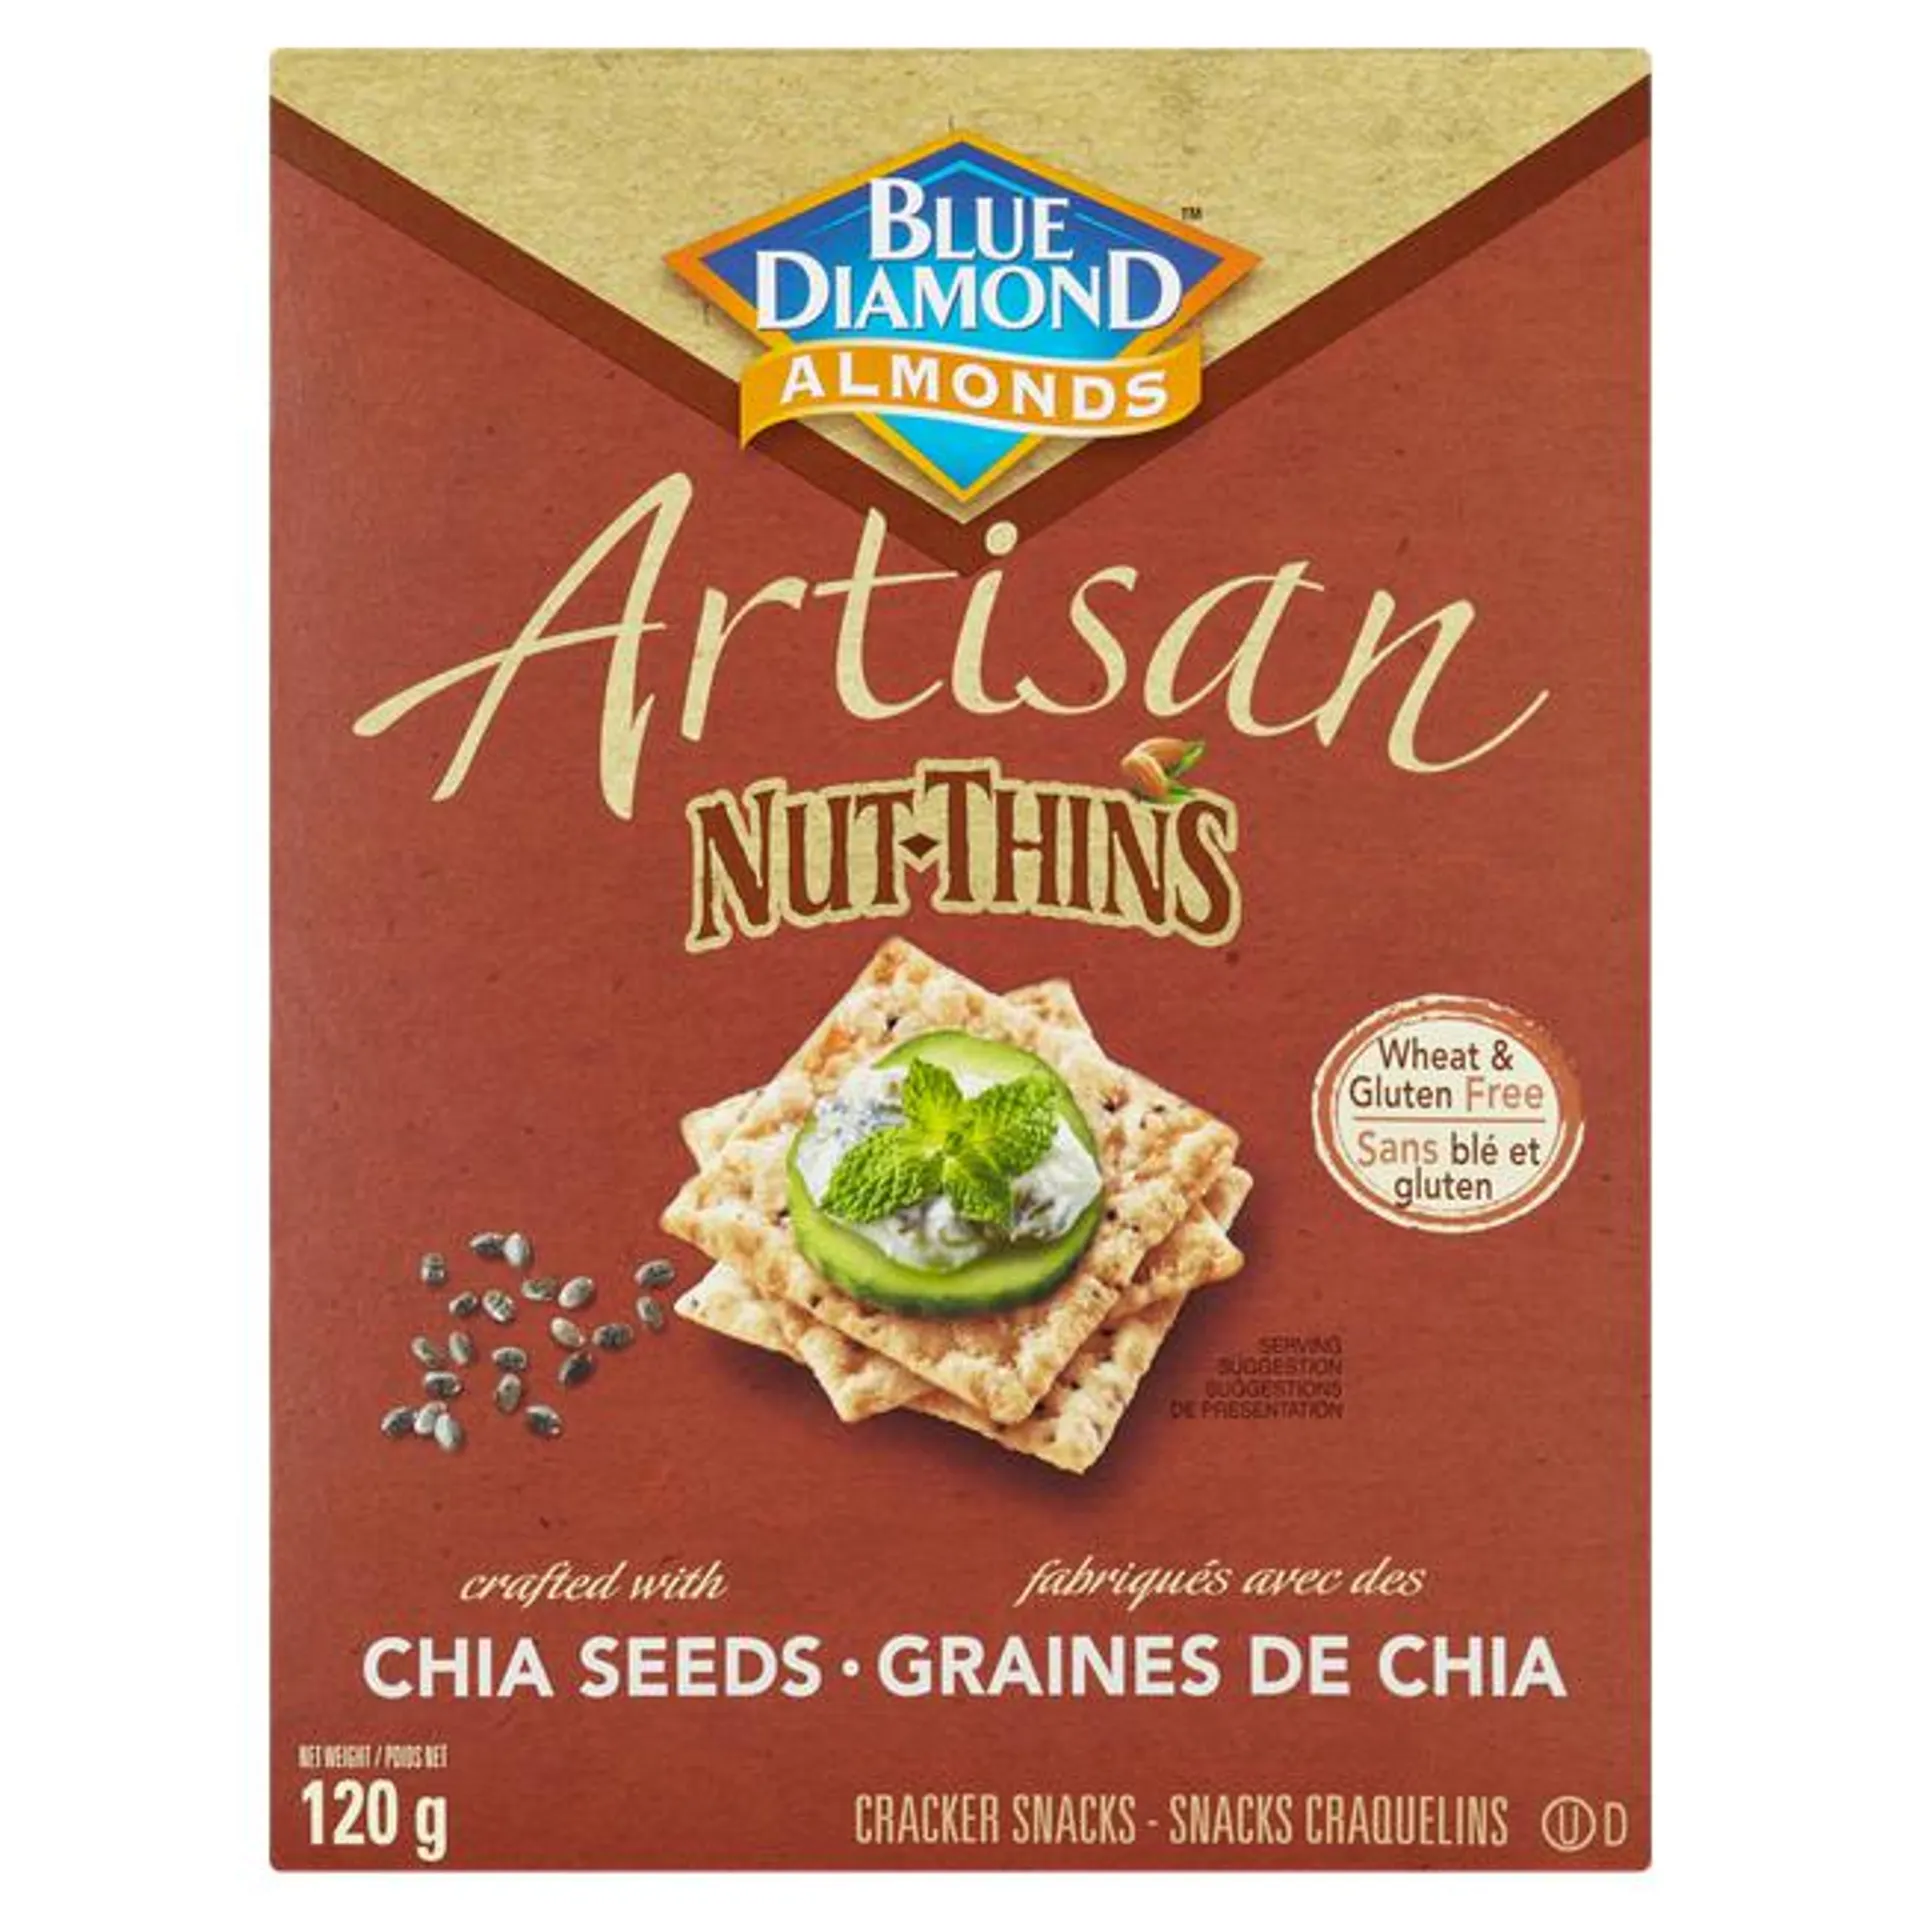 Blue Diamond Almonds Artisan Nut-Thins Cracker Snacks Crafted With Chia Seeds 120 g